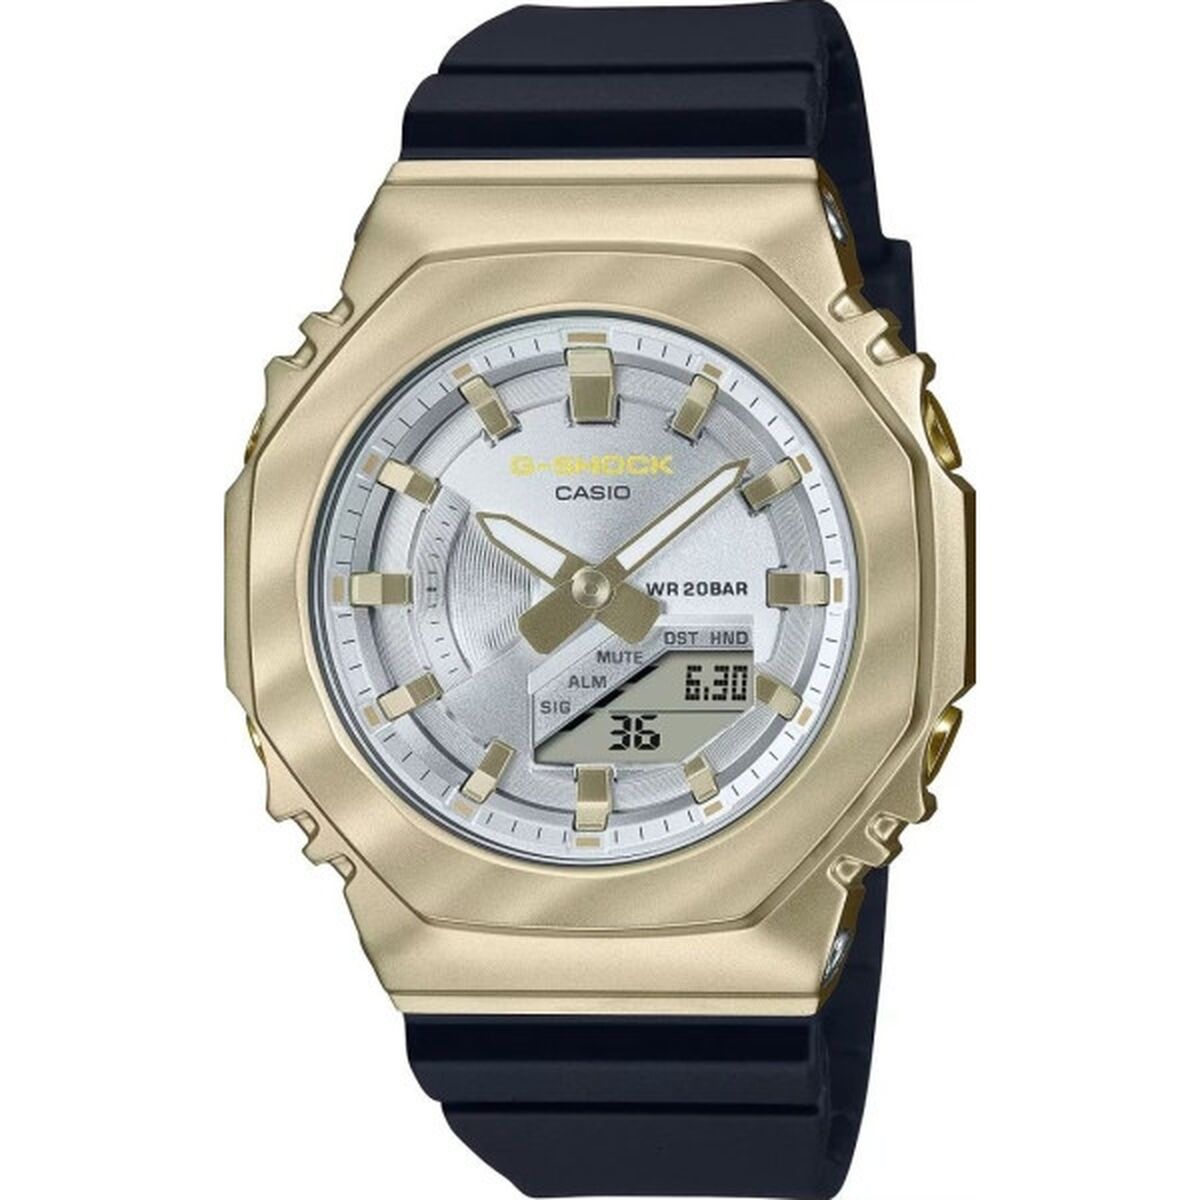 Horloge Dames Casio G-Shock OAK METAL COVERED COMPACT - BELLE COURBE SERIE